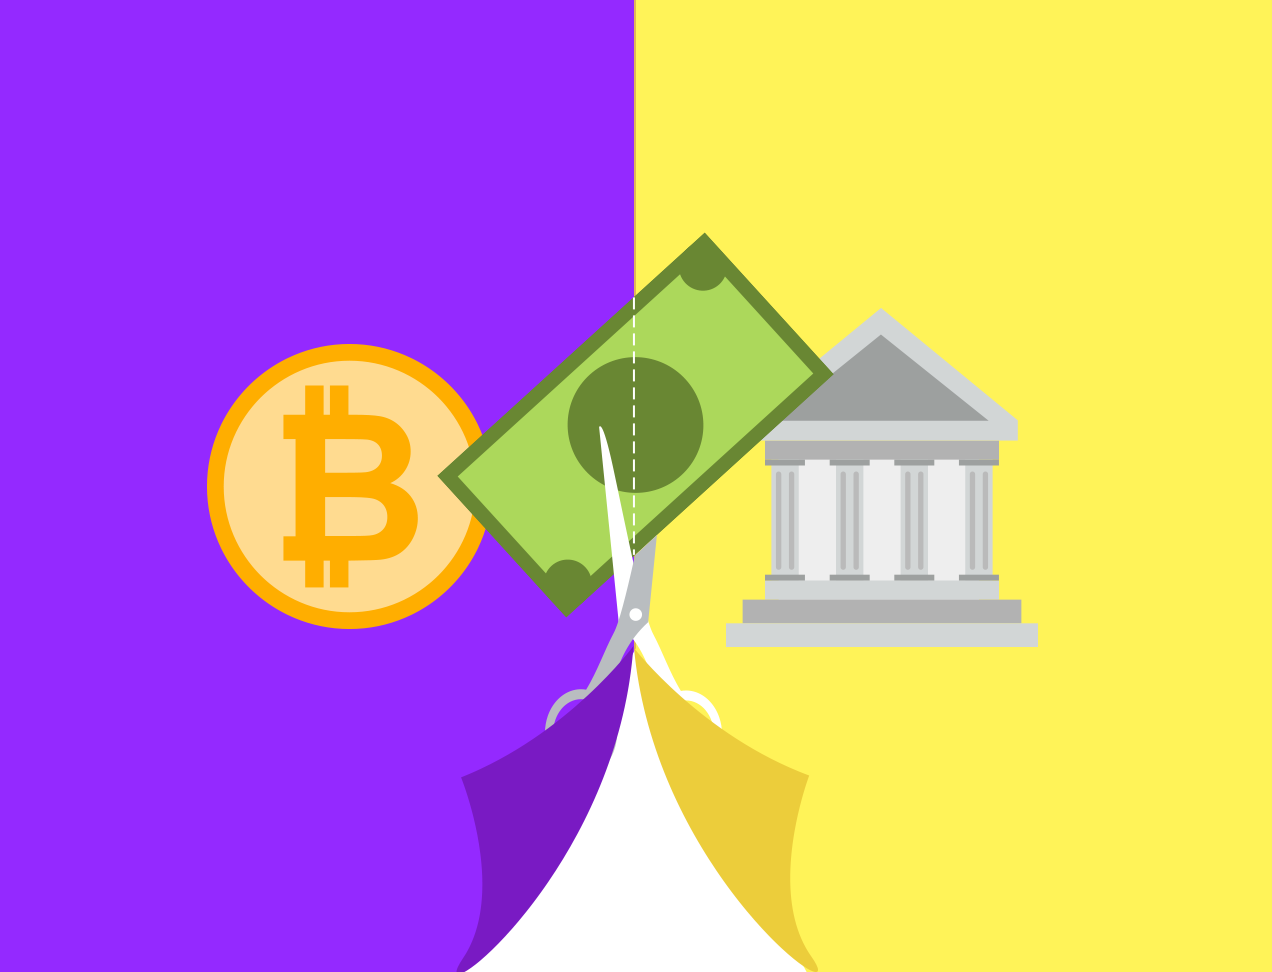 Traditional banks hate crypto – Part II